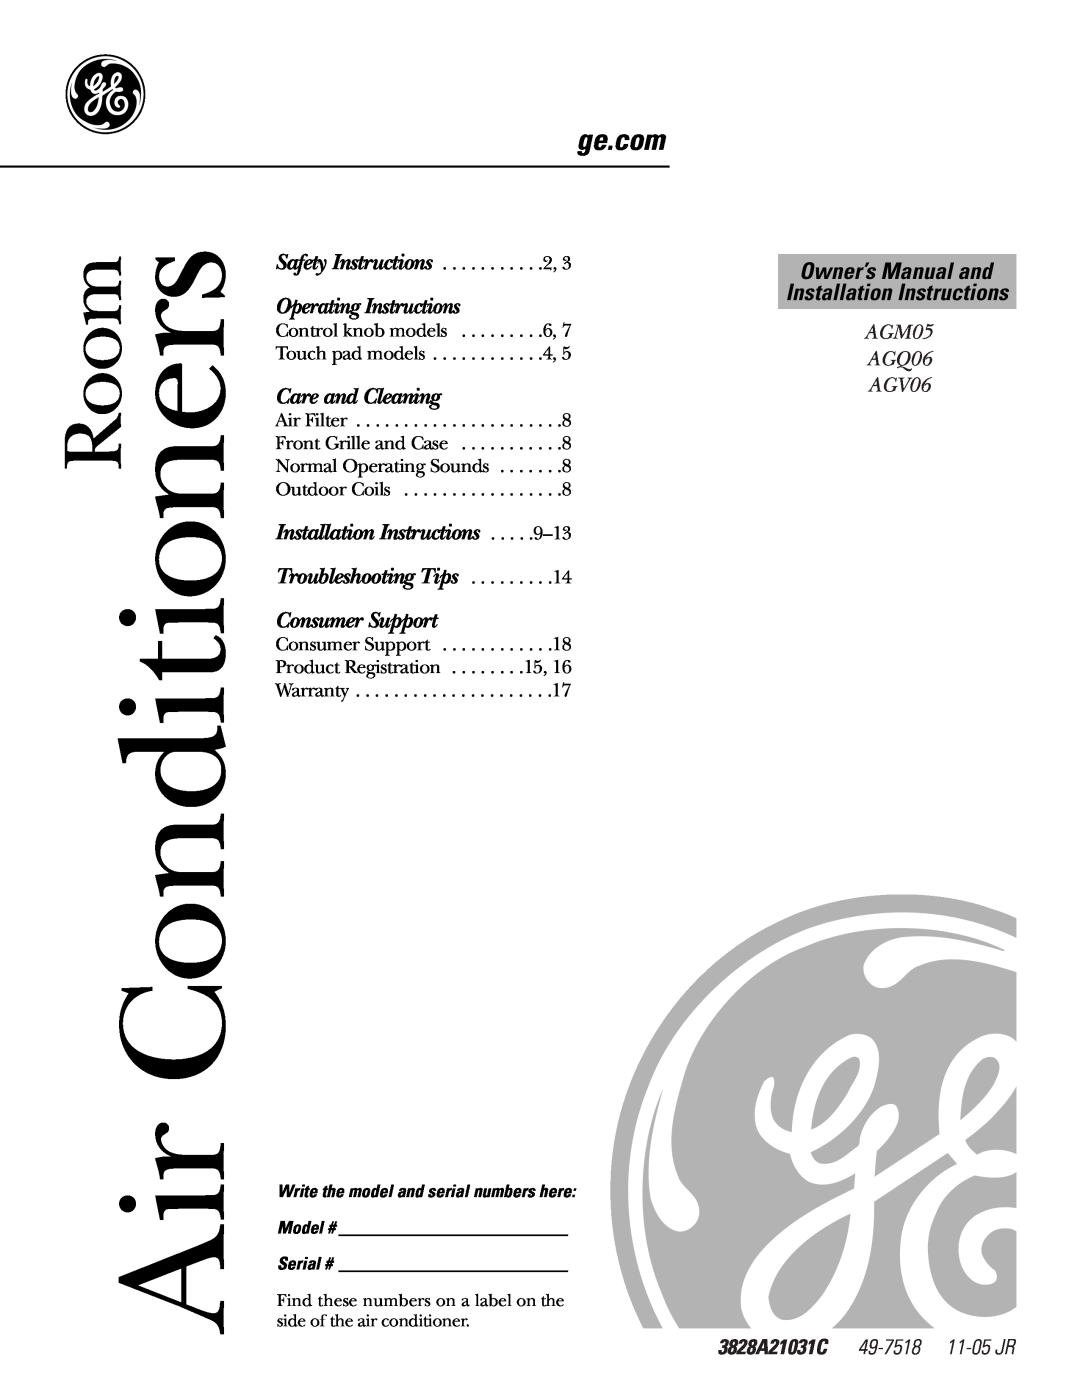 GE AGM05 owner manual Operating Instructions, Care and Cleaning, Installation Instructions, Troubleshooting Tips, Room 